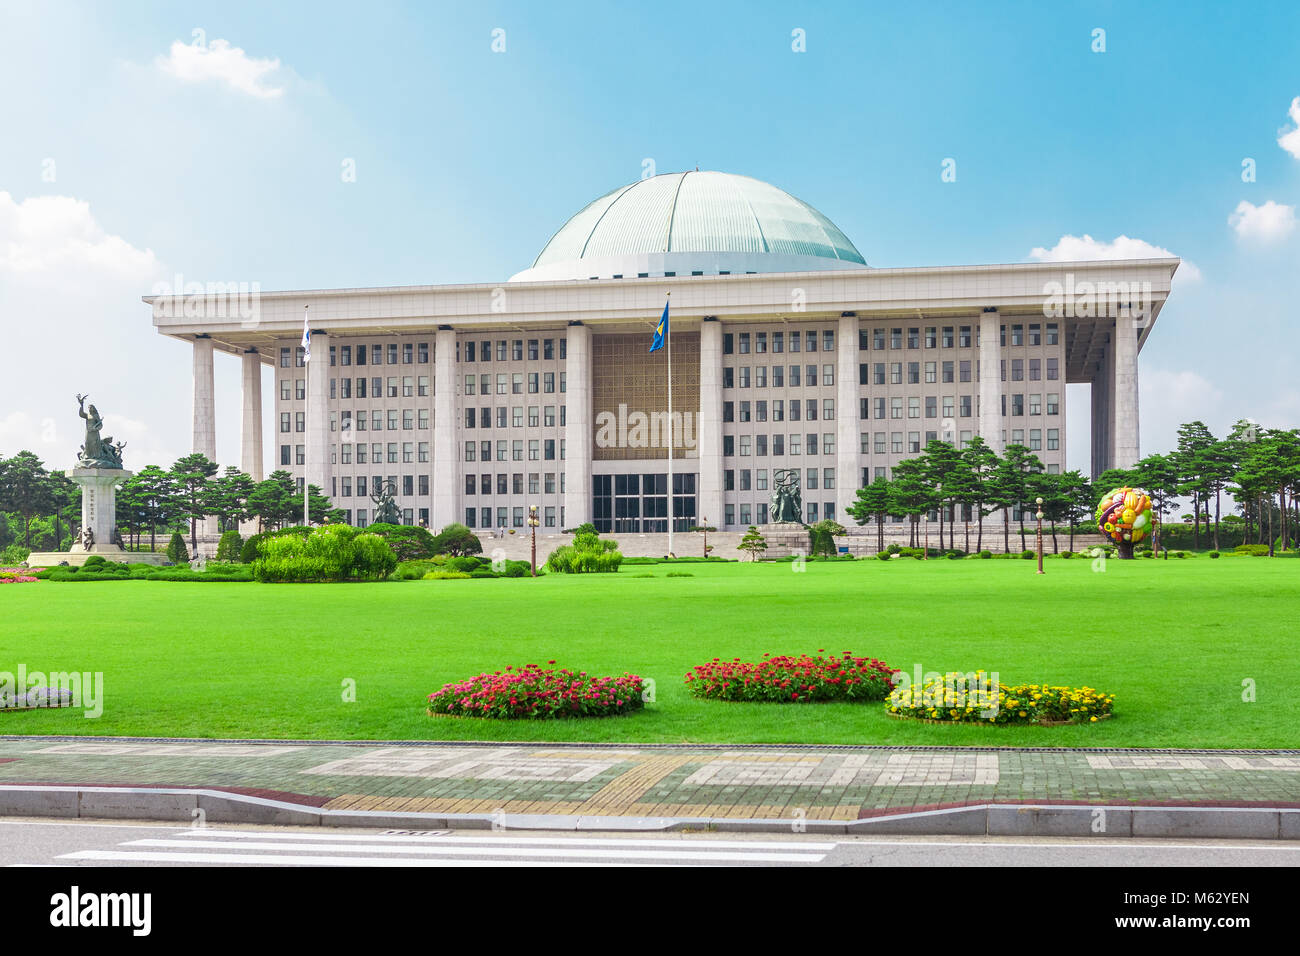 SEOUL, KOREA - AUGUST 14, 2015: Building of National Assembly Proceeding Hall - South Korean Capitol building - located on Yeouido island - Seoul, Kor Stock Photo